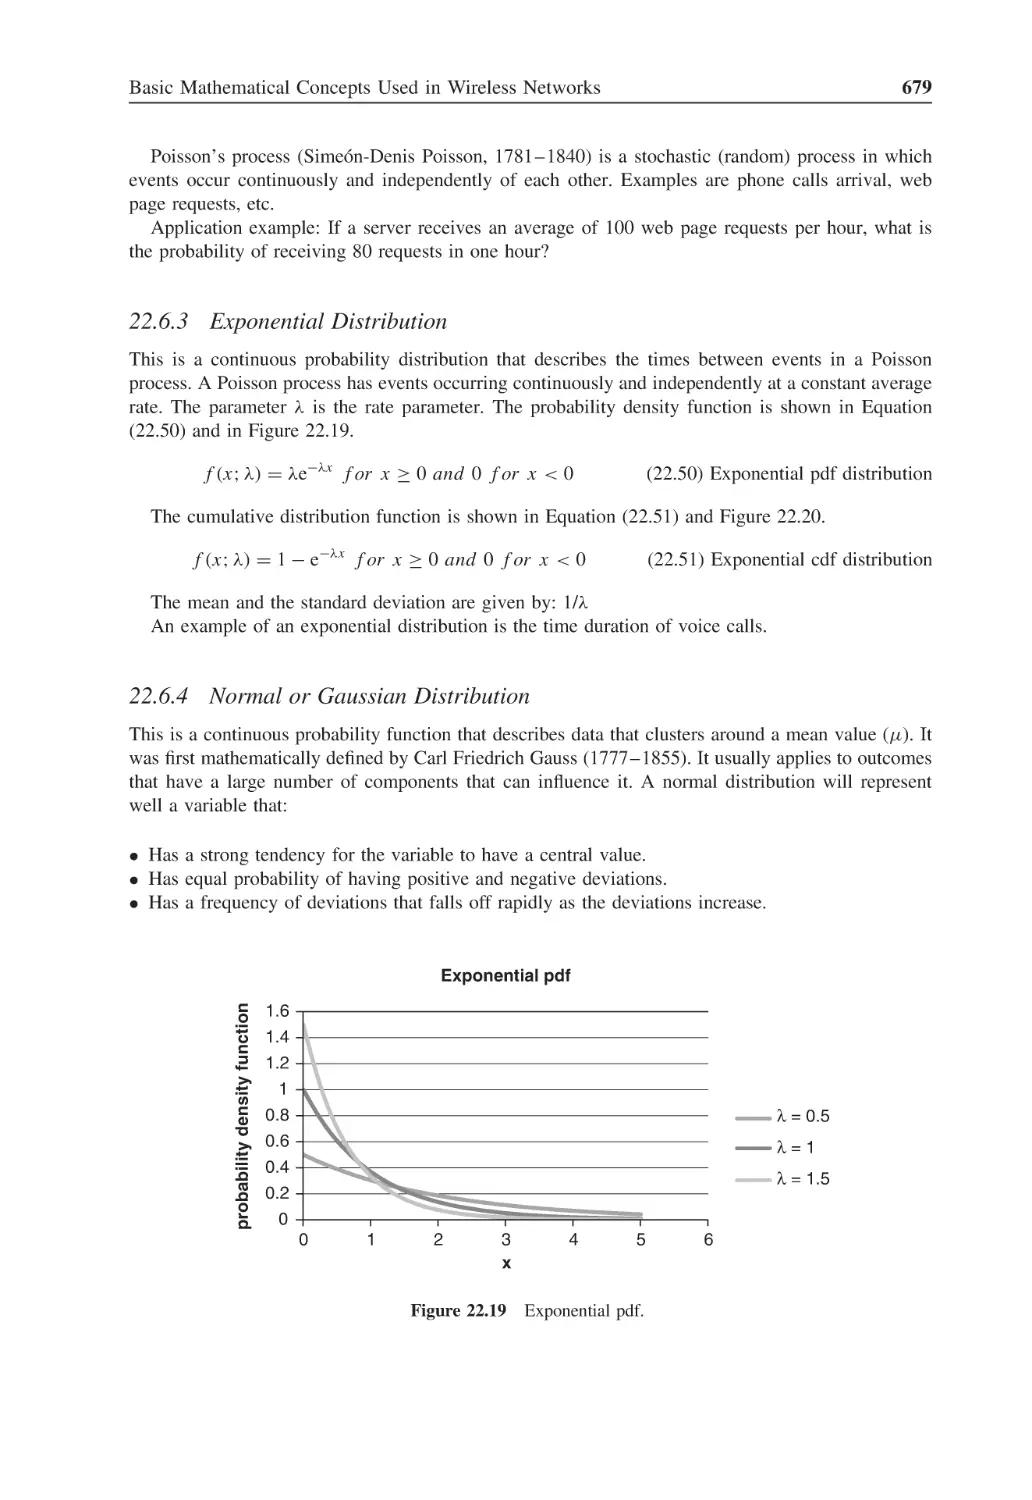 22.6.3 Exponential Distribution
22.6.4 Normal or Gaussian Distribution